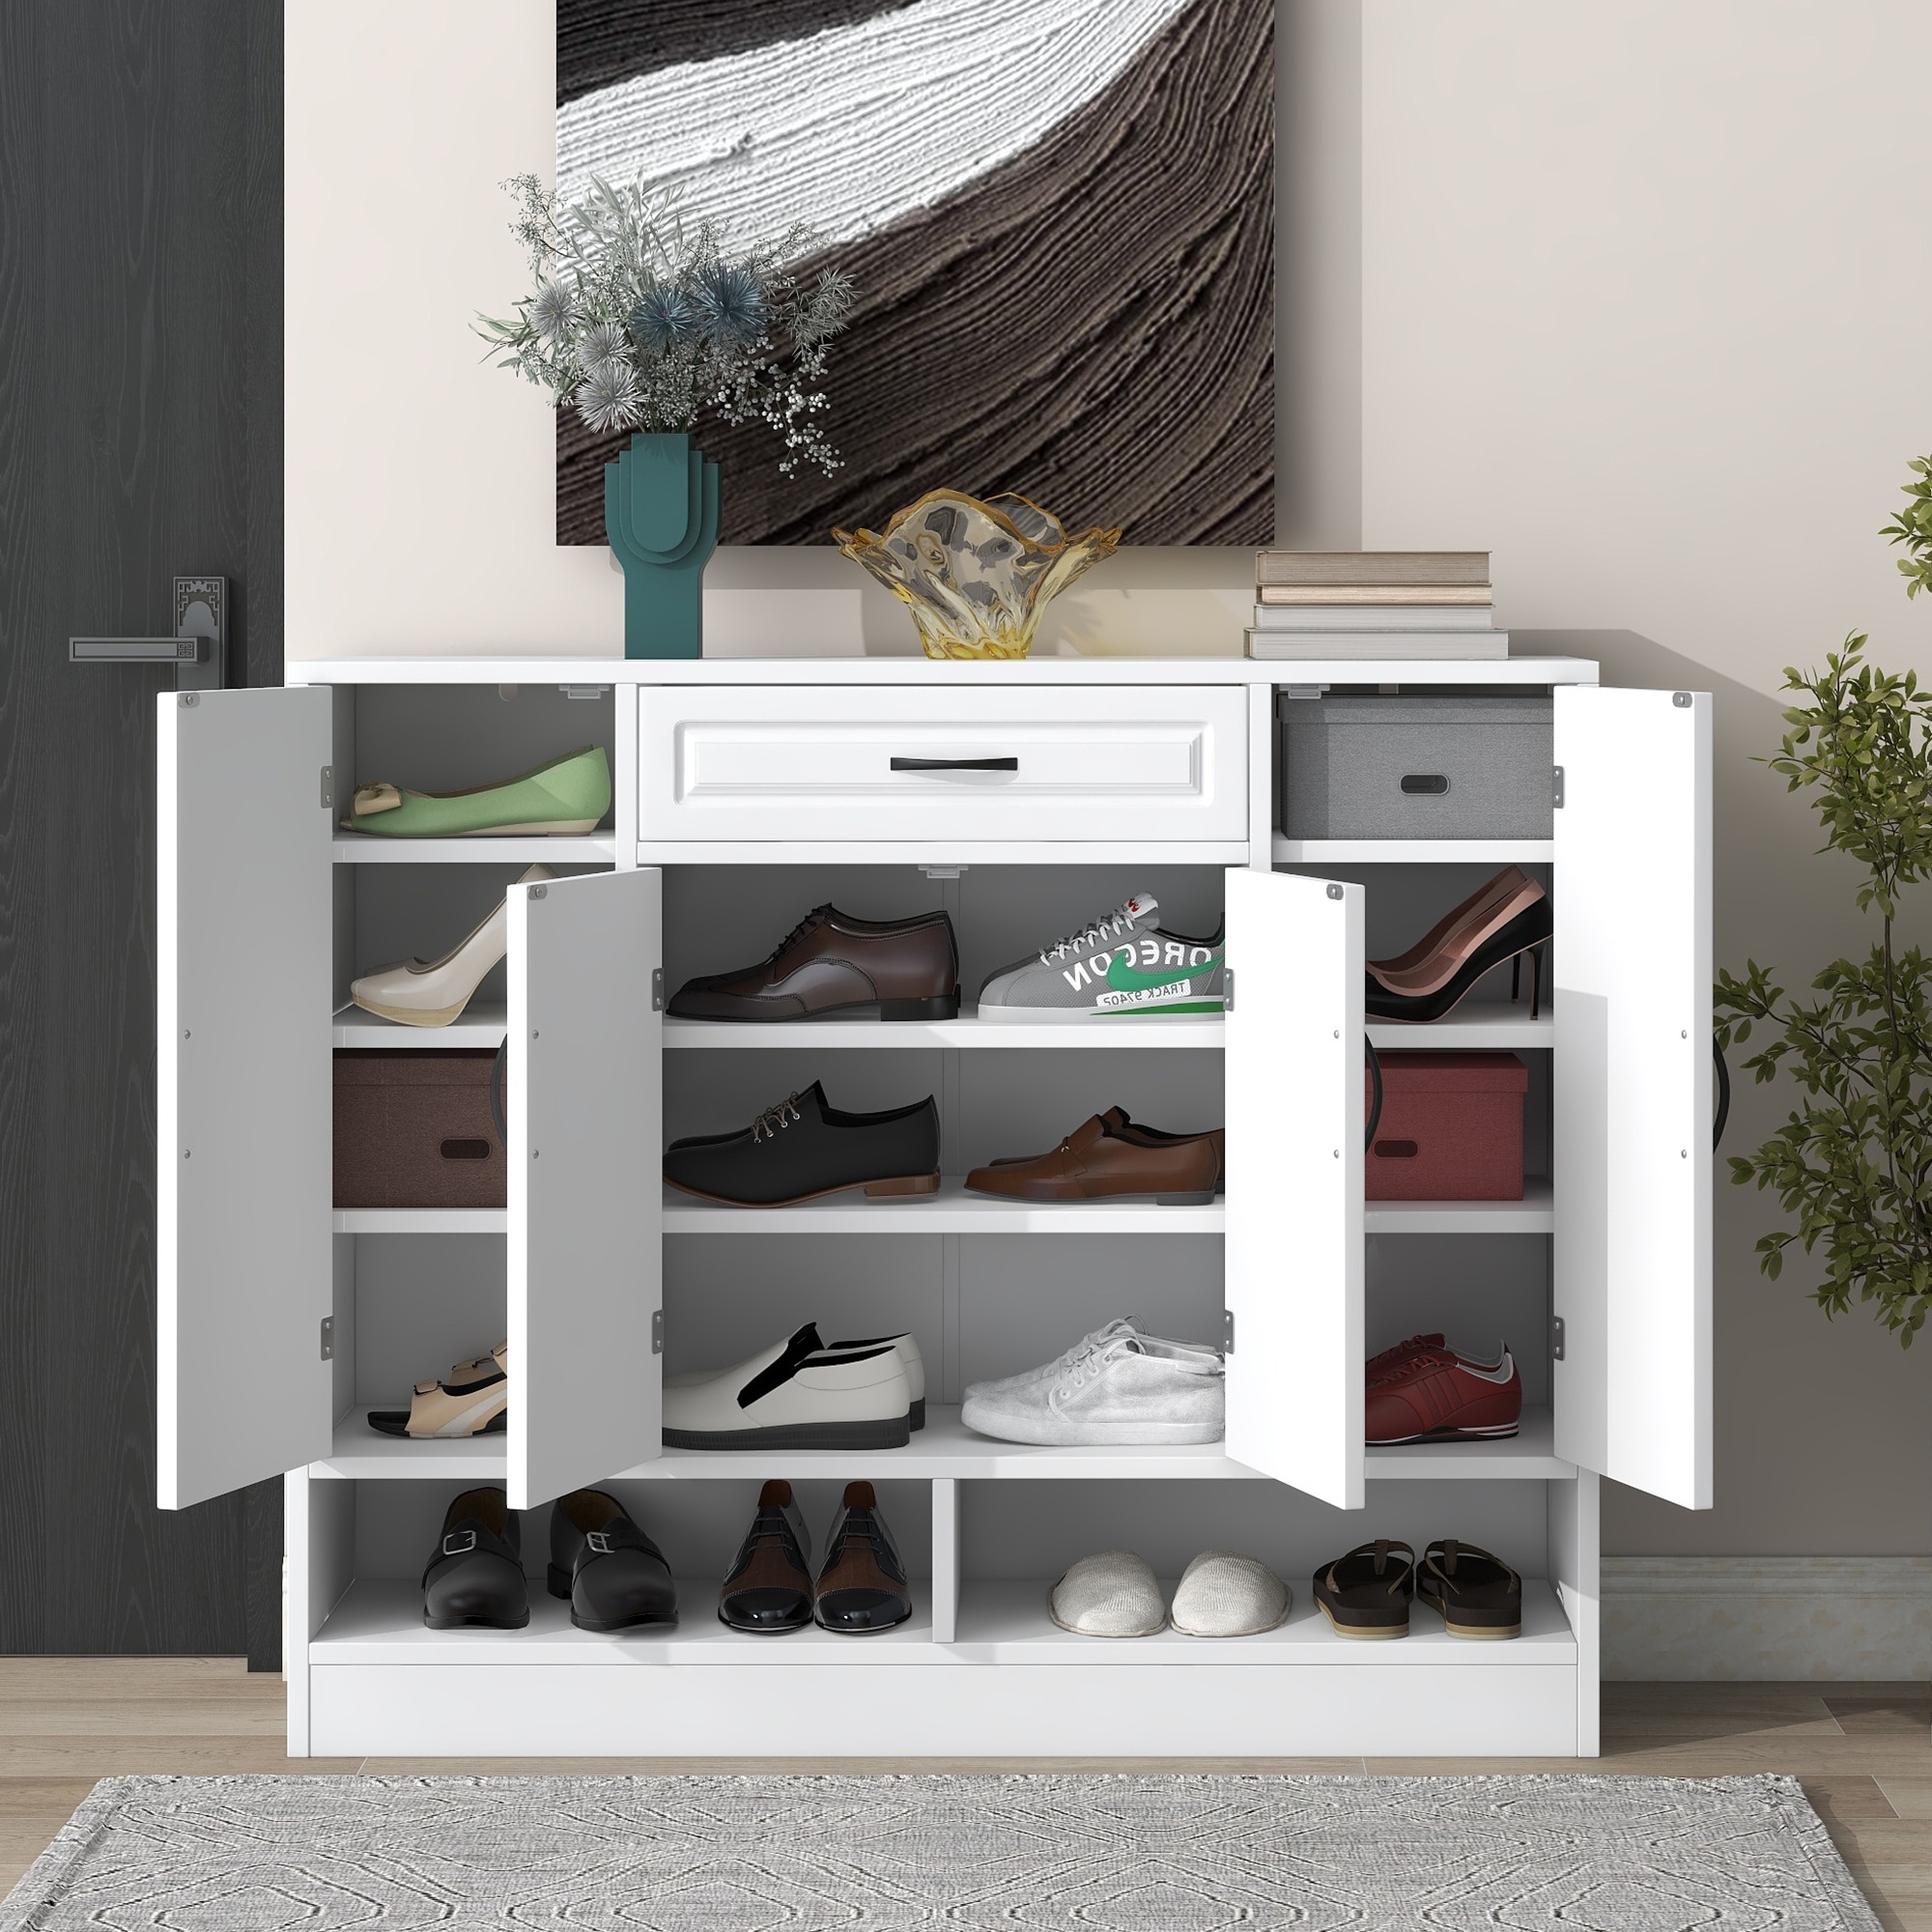 https://ak1.ostkcdn.com/images/products/is/images/direct/89a7ce37ead3dfb188035bdf6780c298c002a0f4/Shoe-Cabinet-for-Entryway%2C-Modern-Free-Standing-Shoe-Storage-Cabinets%2C-Shoe-Organizer-Cabinet-with-Adjustable-Shelves.jpg